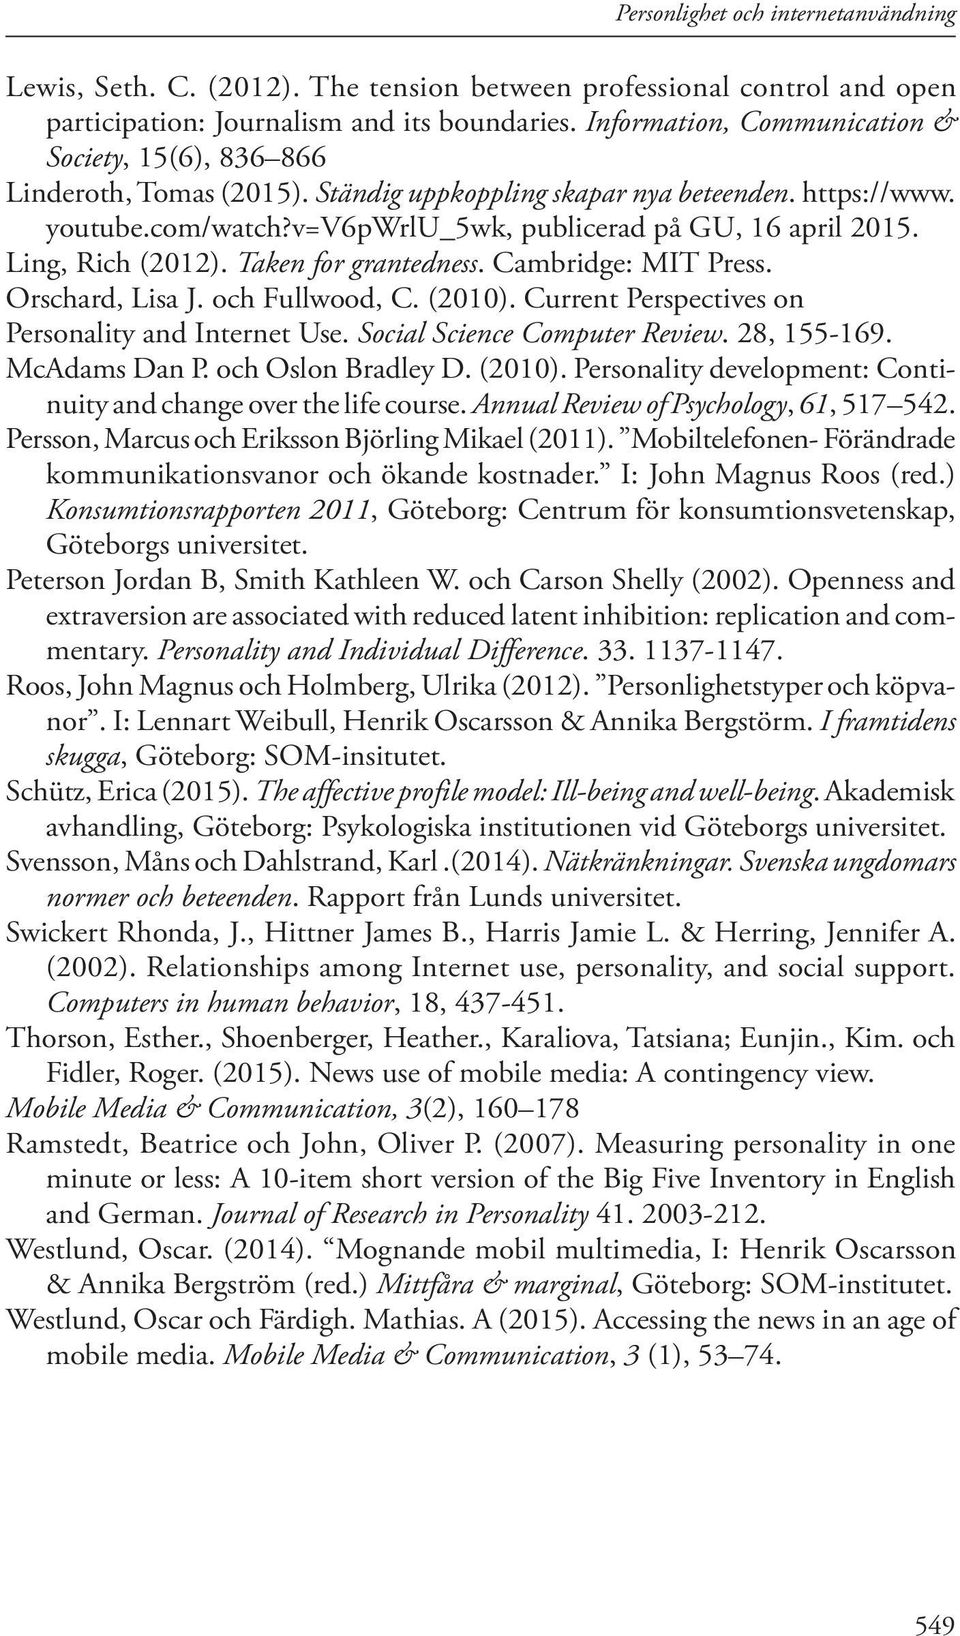 Orschard, Lisa J. och Fullwood, C. (2010). Current Perspectives on Personality and Internet Use. Social Science Computer Review. 28, 155-169. McAdams Dan P. och Oslon Bradley D. (2010). Personality development: Continuity and change over the life course.